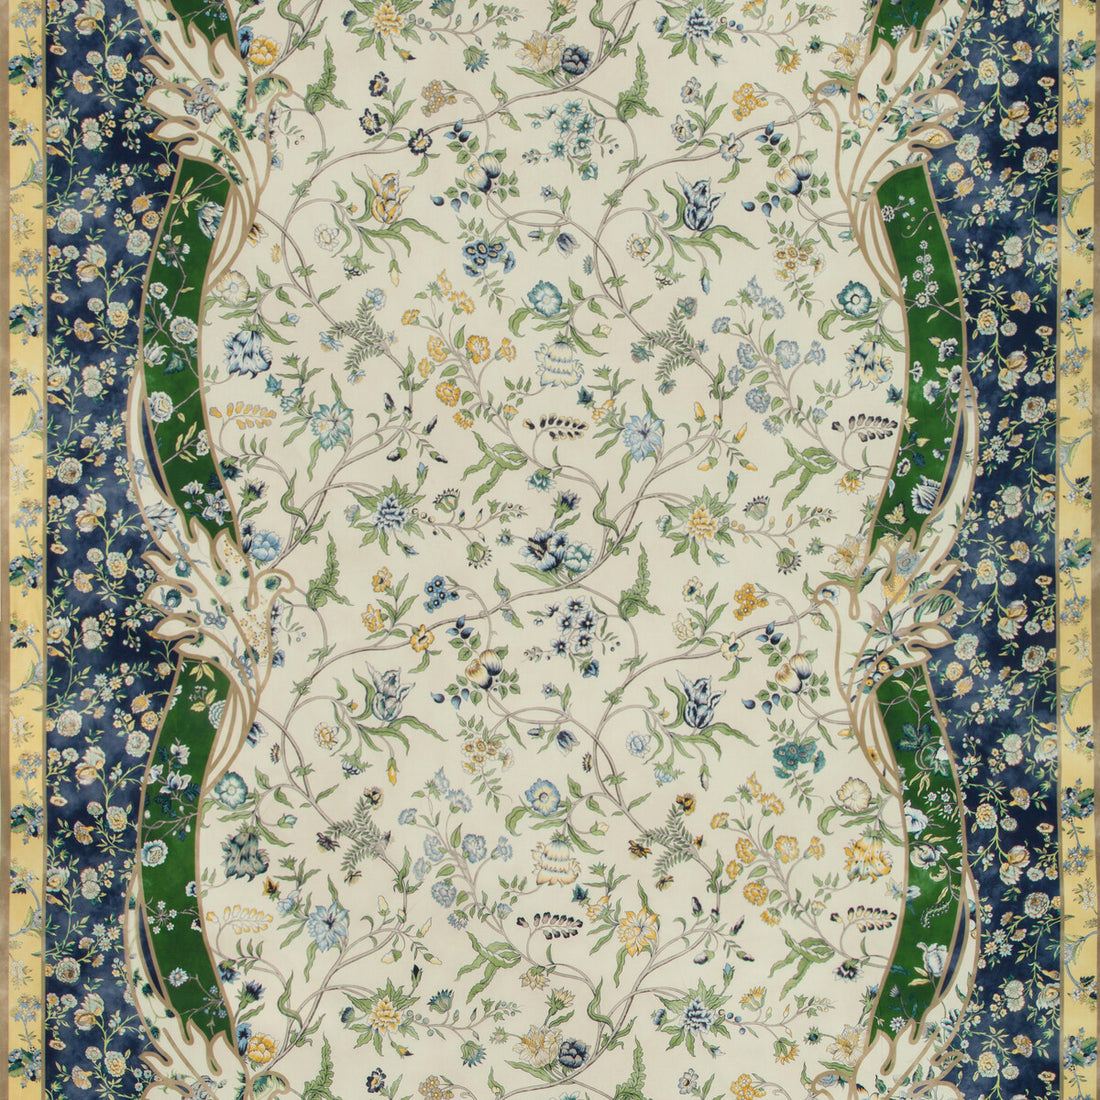 Menars Border II fabric in marine color - pattern 8019126.534.0 - by Brunschwig &amp; Fils in the Folio Francais collection